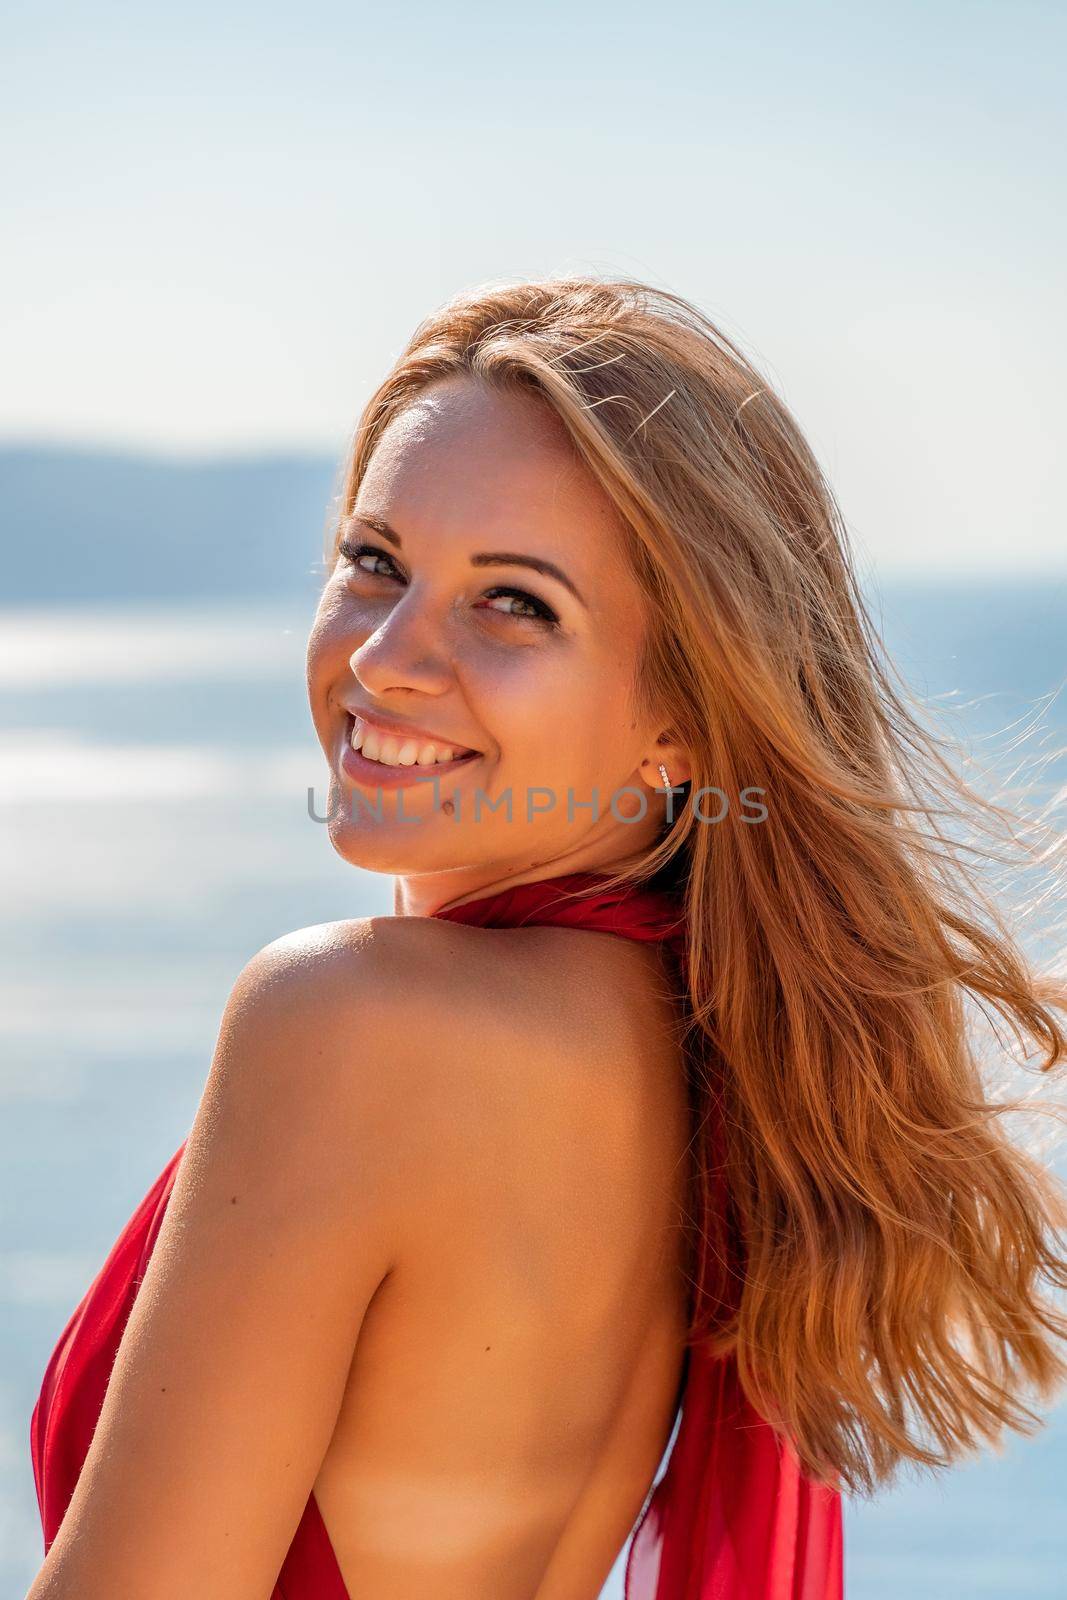 Smiling young woman in a red dress looks at the camera. A beautiful tanned girl enjoys her summer holidays at the sea. Portrait of a stylish carefree woman laughing at the ocean